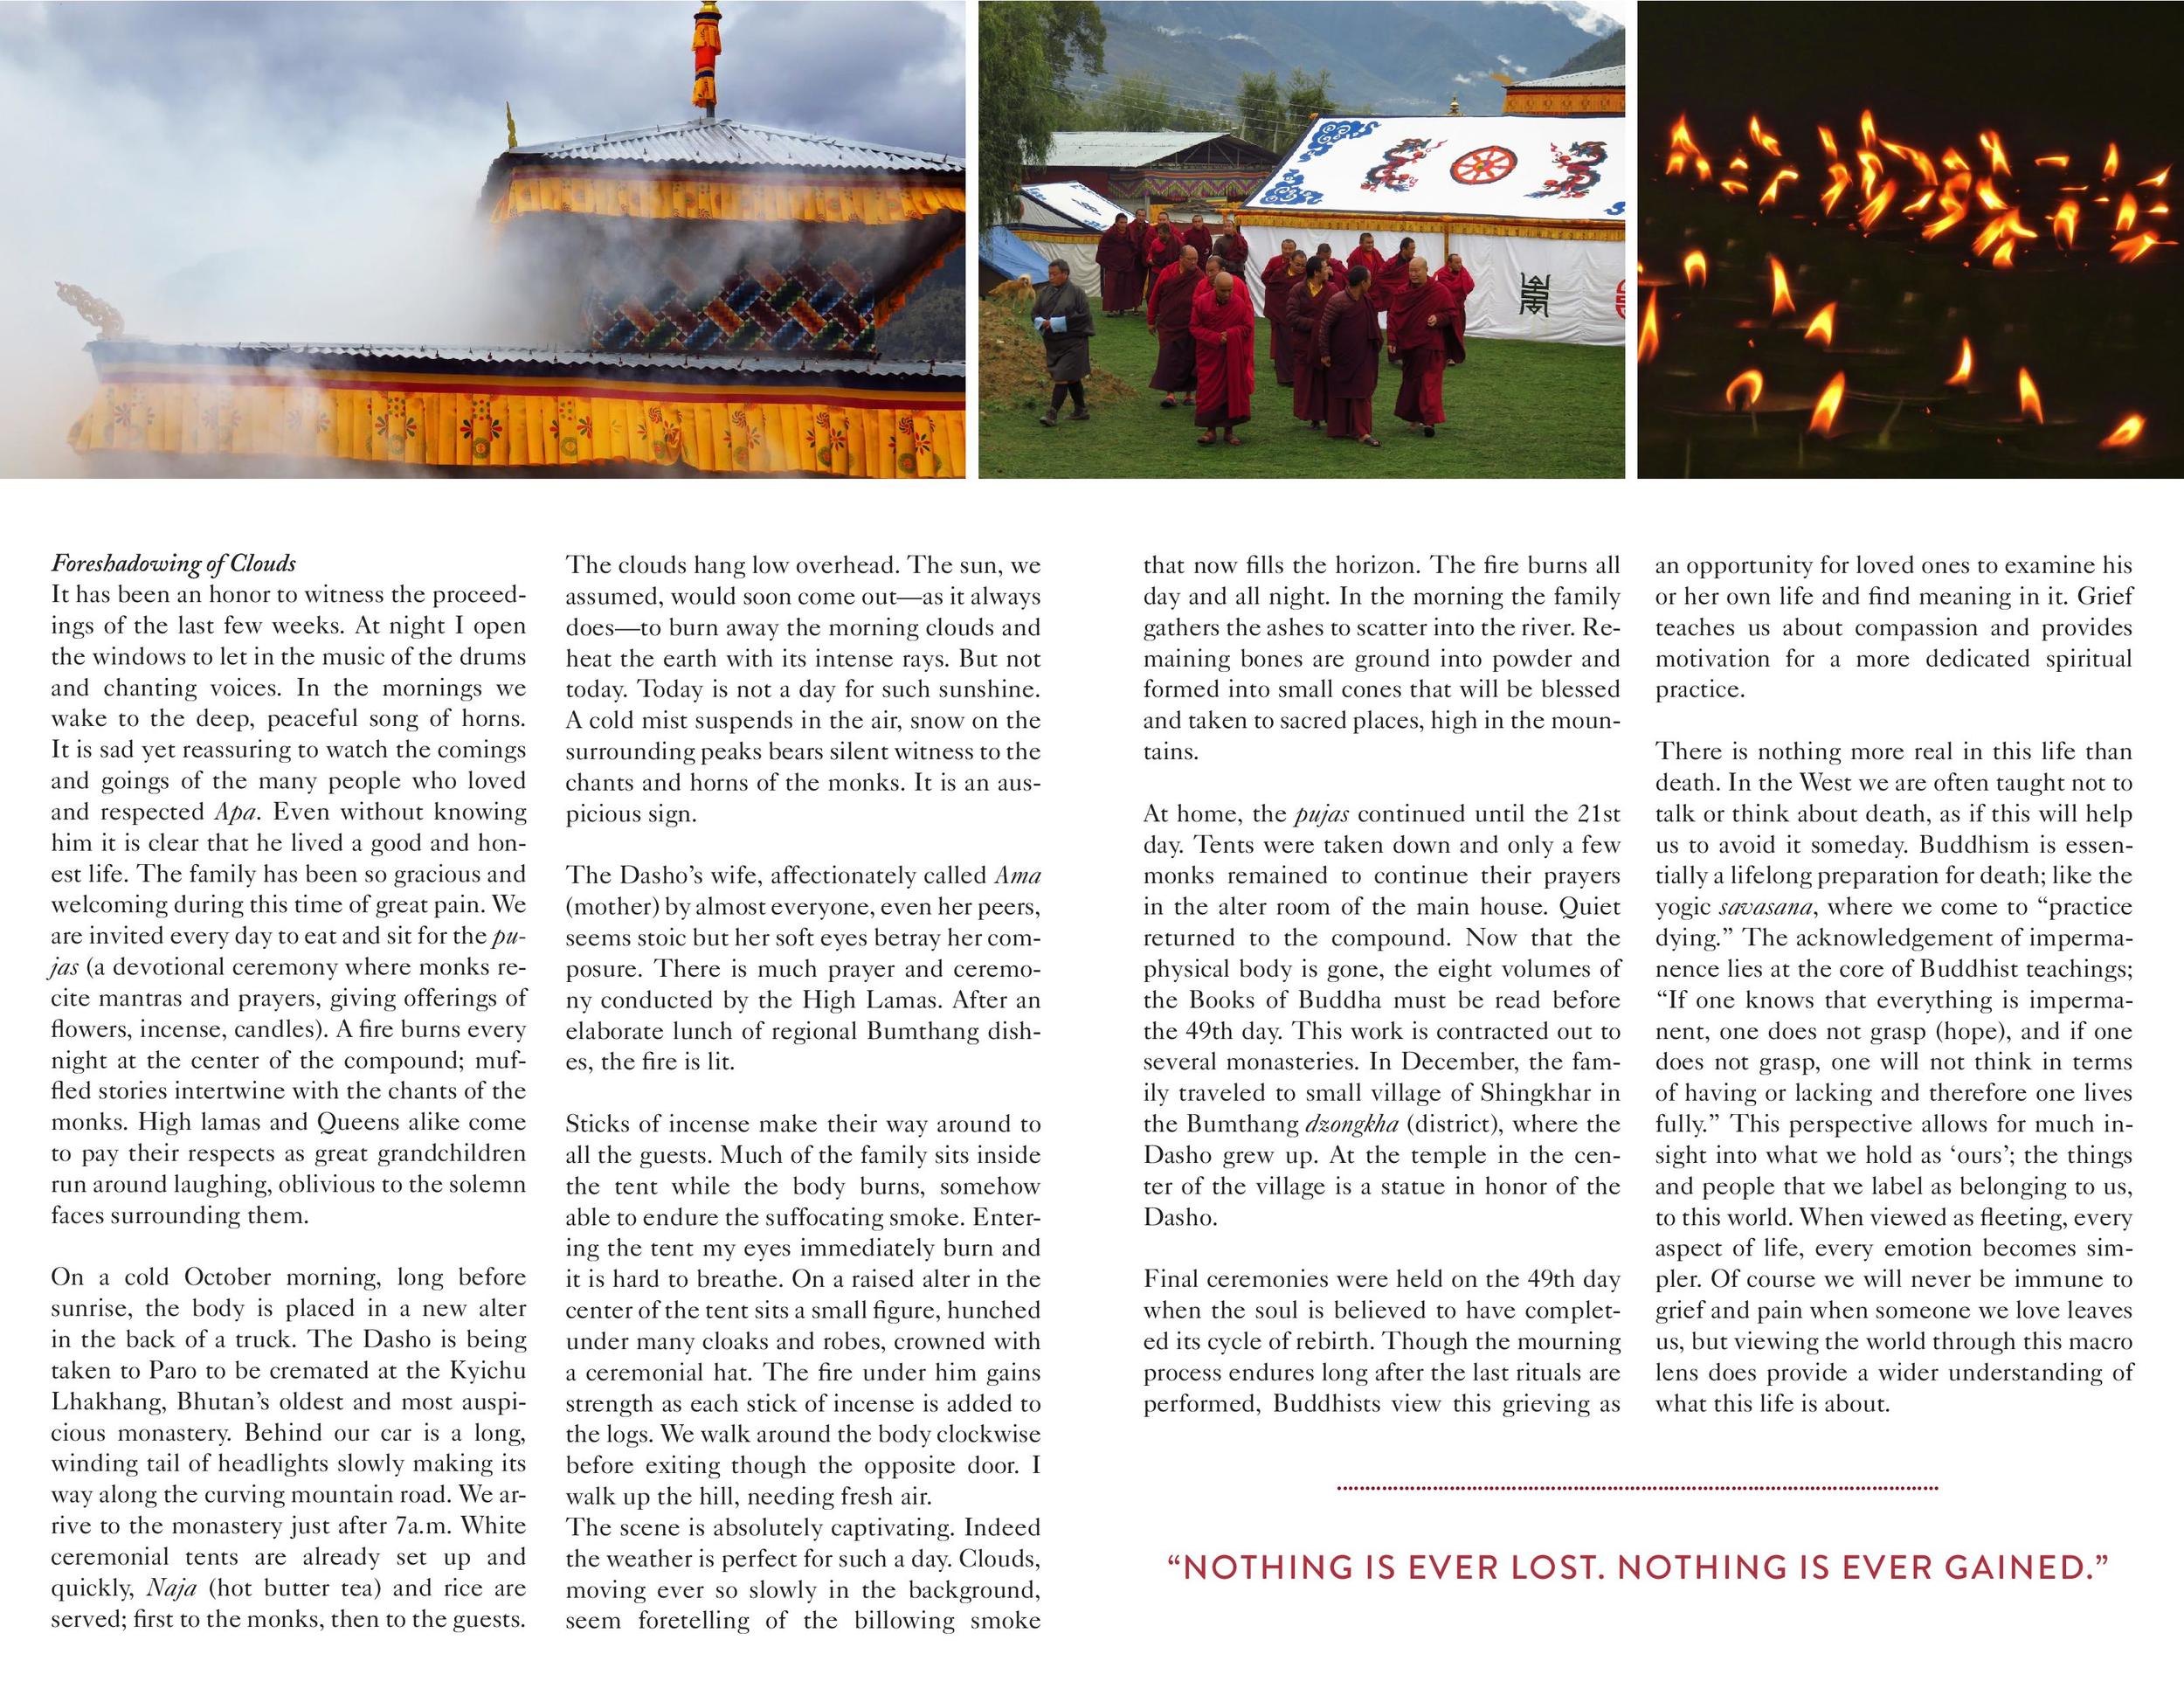 travels_with_a_burro_bhutan_02-page-014.jpg